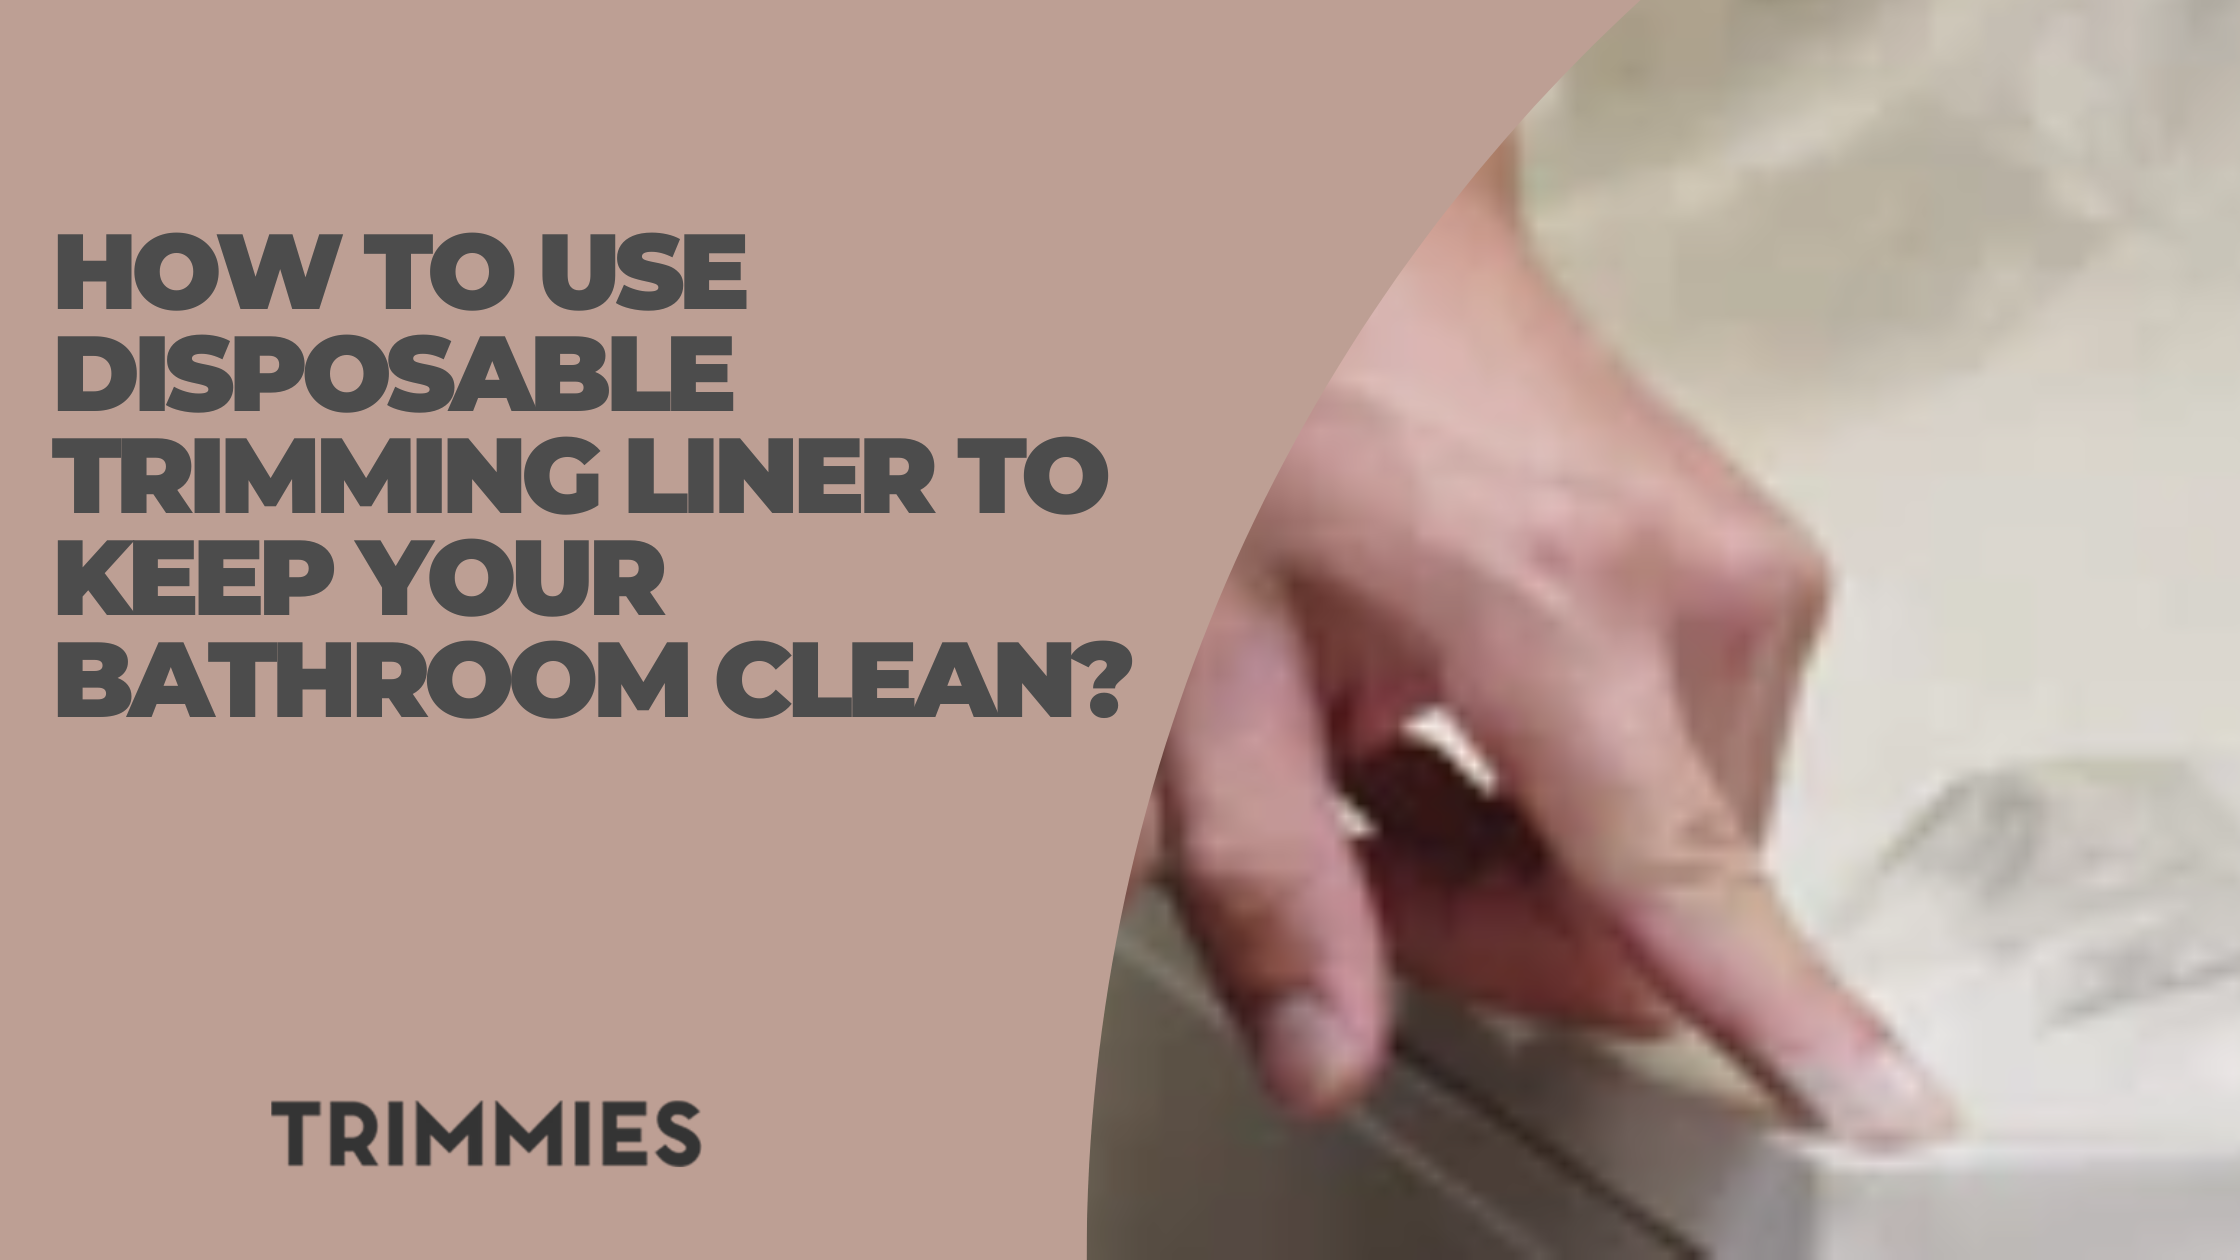 How to use disposable trimming liner to keep your bathroom Clean?